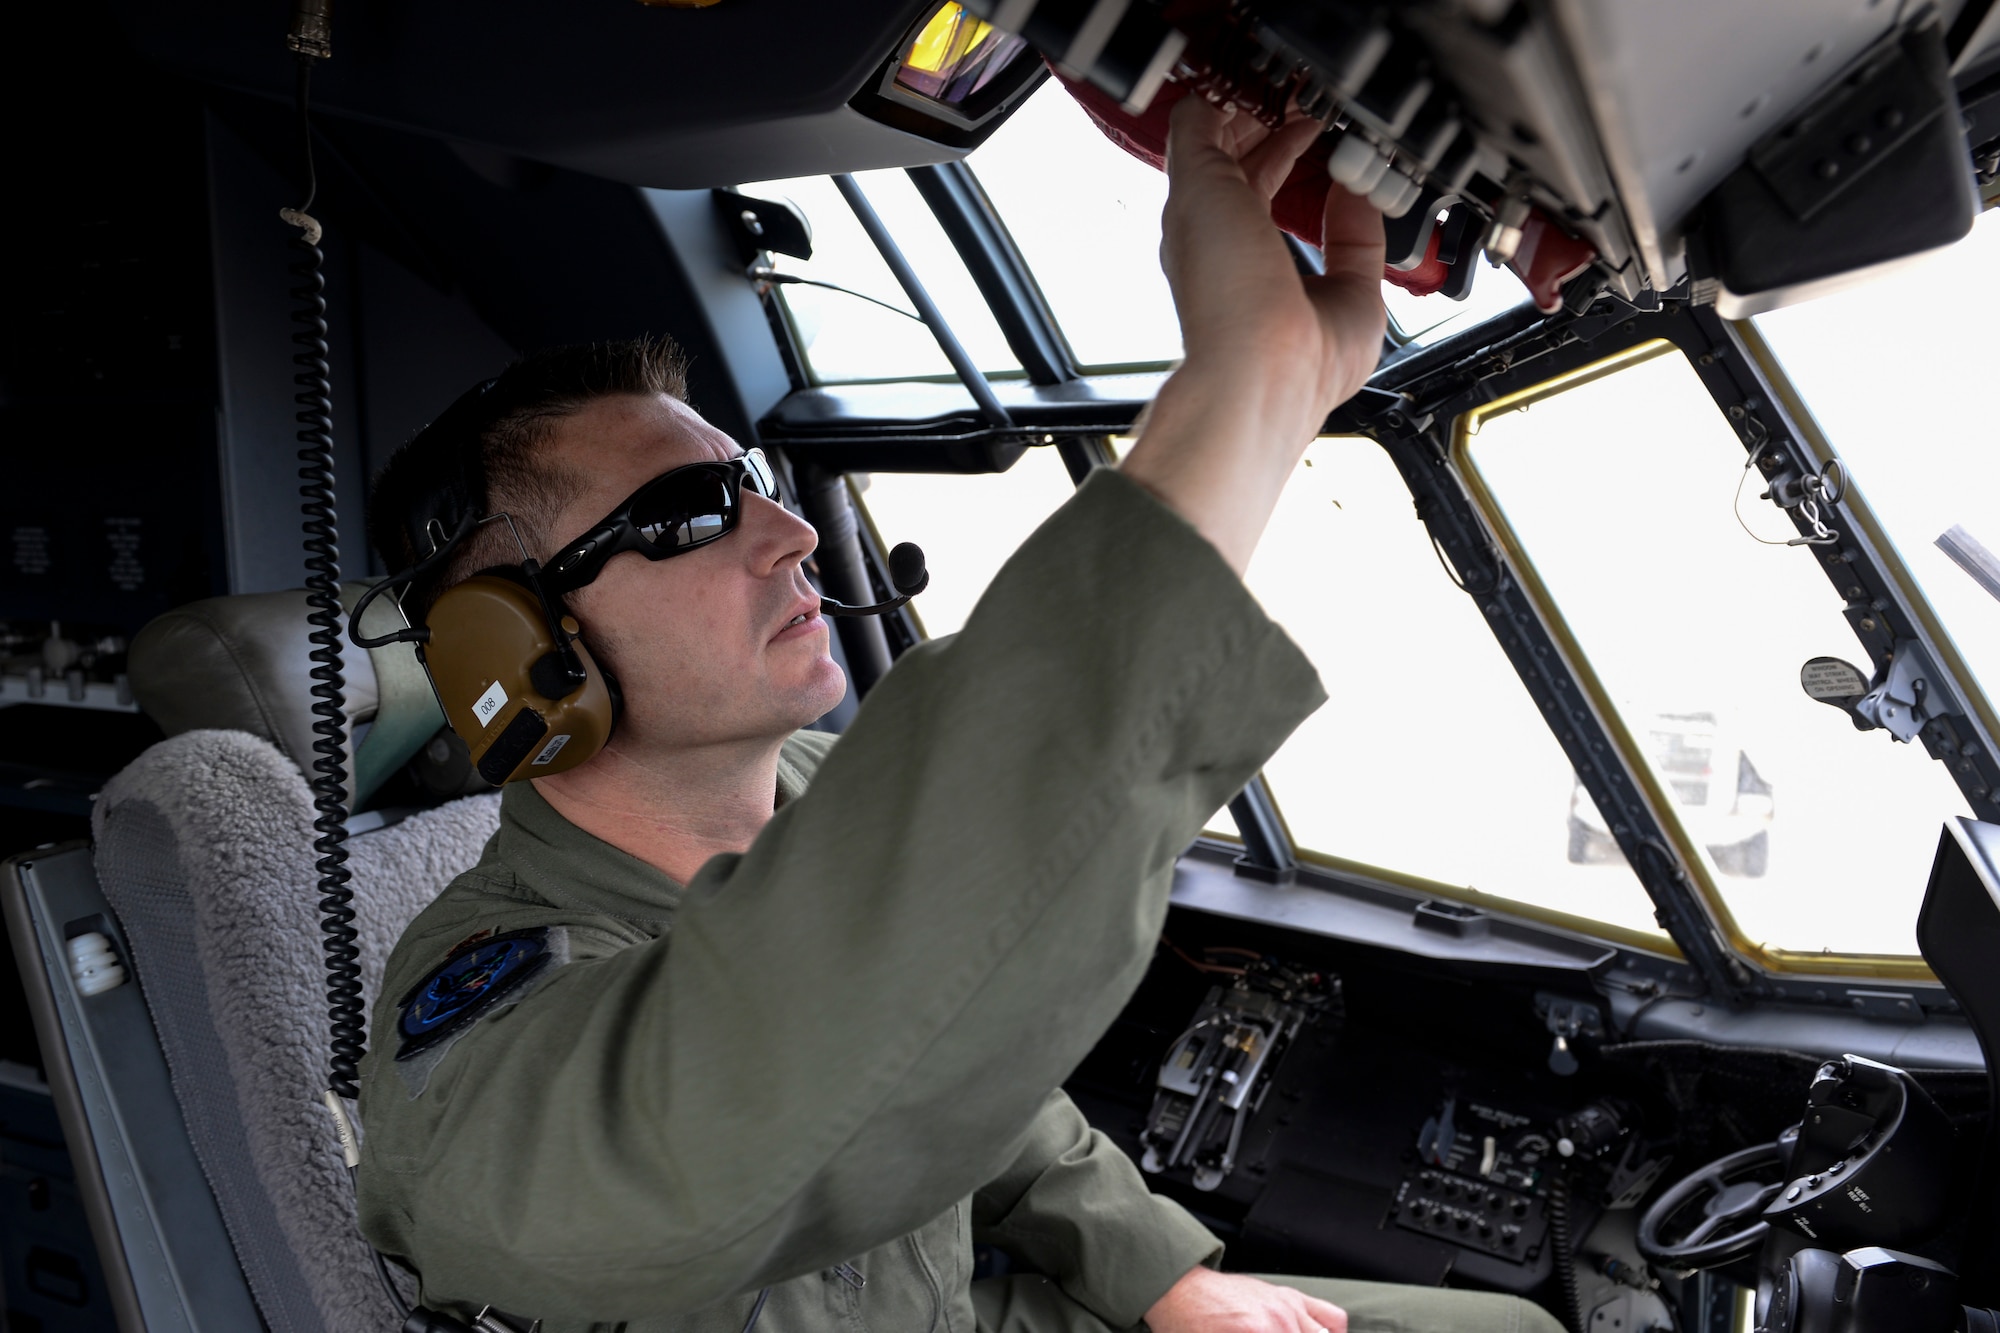 U.S. Air Force Maj. Robert Bingham, 17th Special Operations Squadron Standards and Evaluation chief, completes preflight checklist before flying the MC-130J Commando II Sept. 10, 2015, on Kadena Air Base, Japan. Bingham received the General P.K. Carlton Award from the Airlift/Tanker Association during an award banquet held Oct. 29 in Orlando, Fla. (U.S. Air Force photo by Senior Airman John Linzmeier)